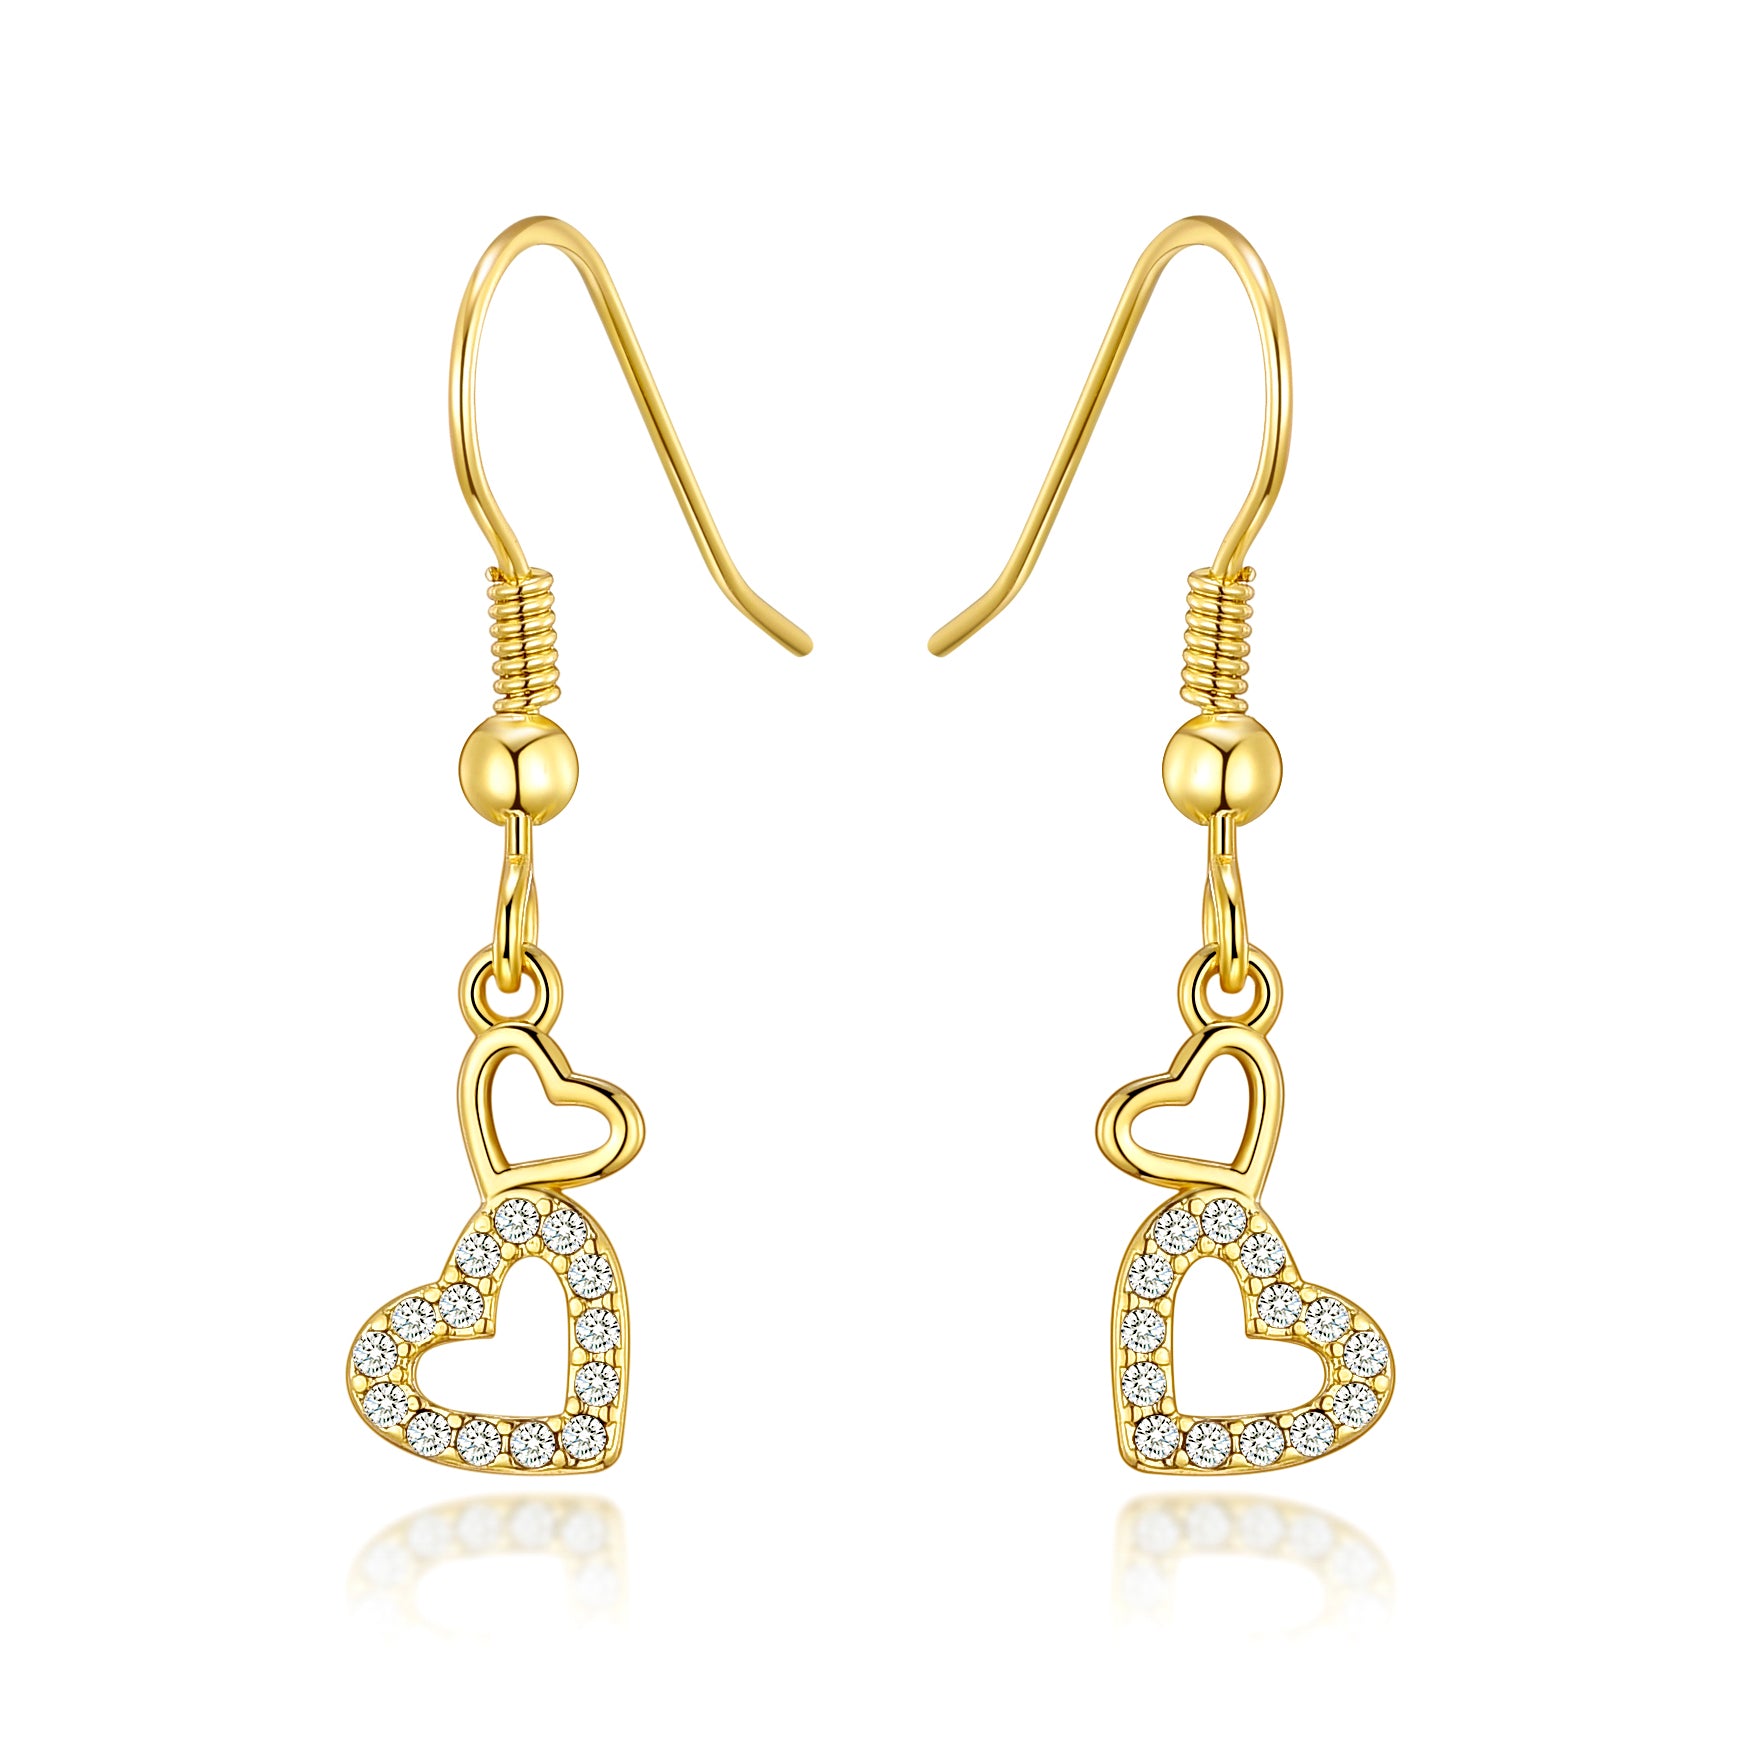 Gold Plated Double Heart Drop Earrings Created with Zircondia® Crystals by Philip Jones Jewellery